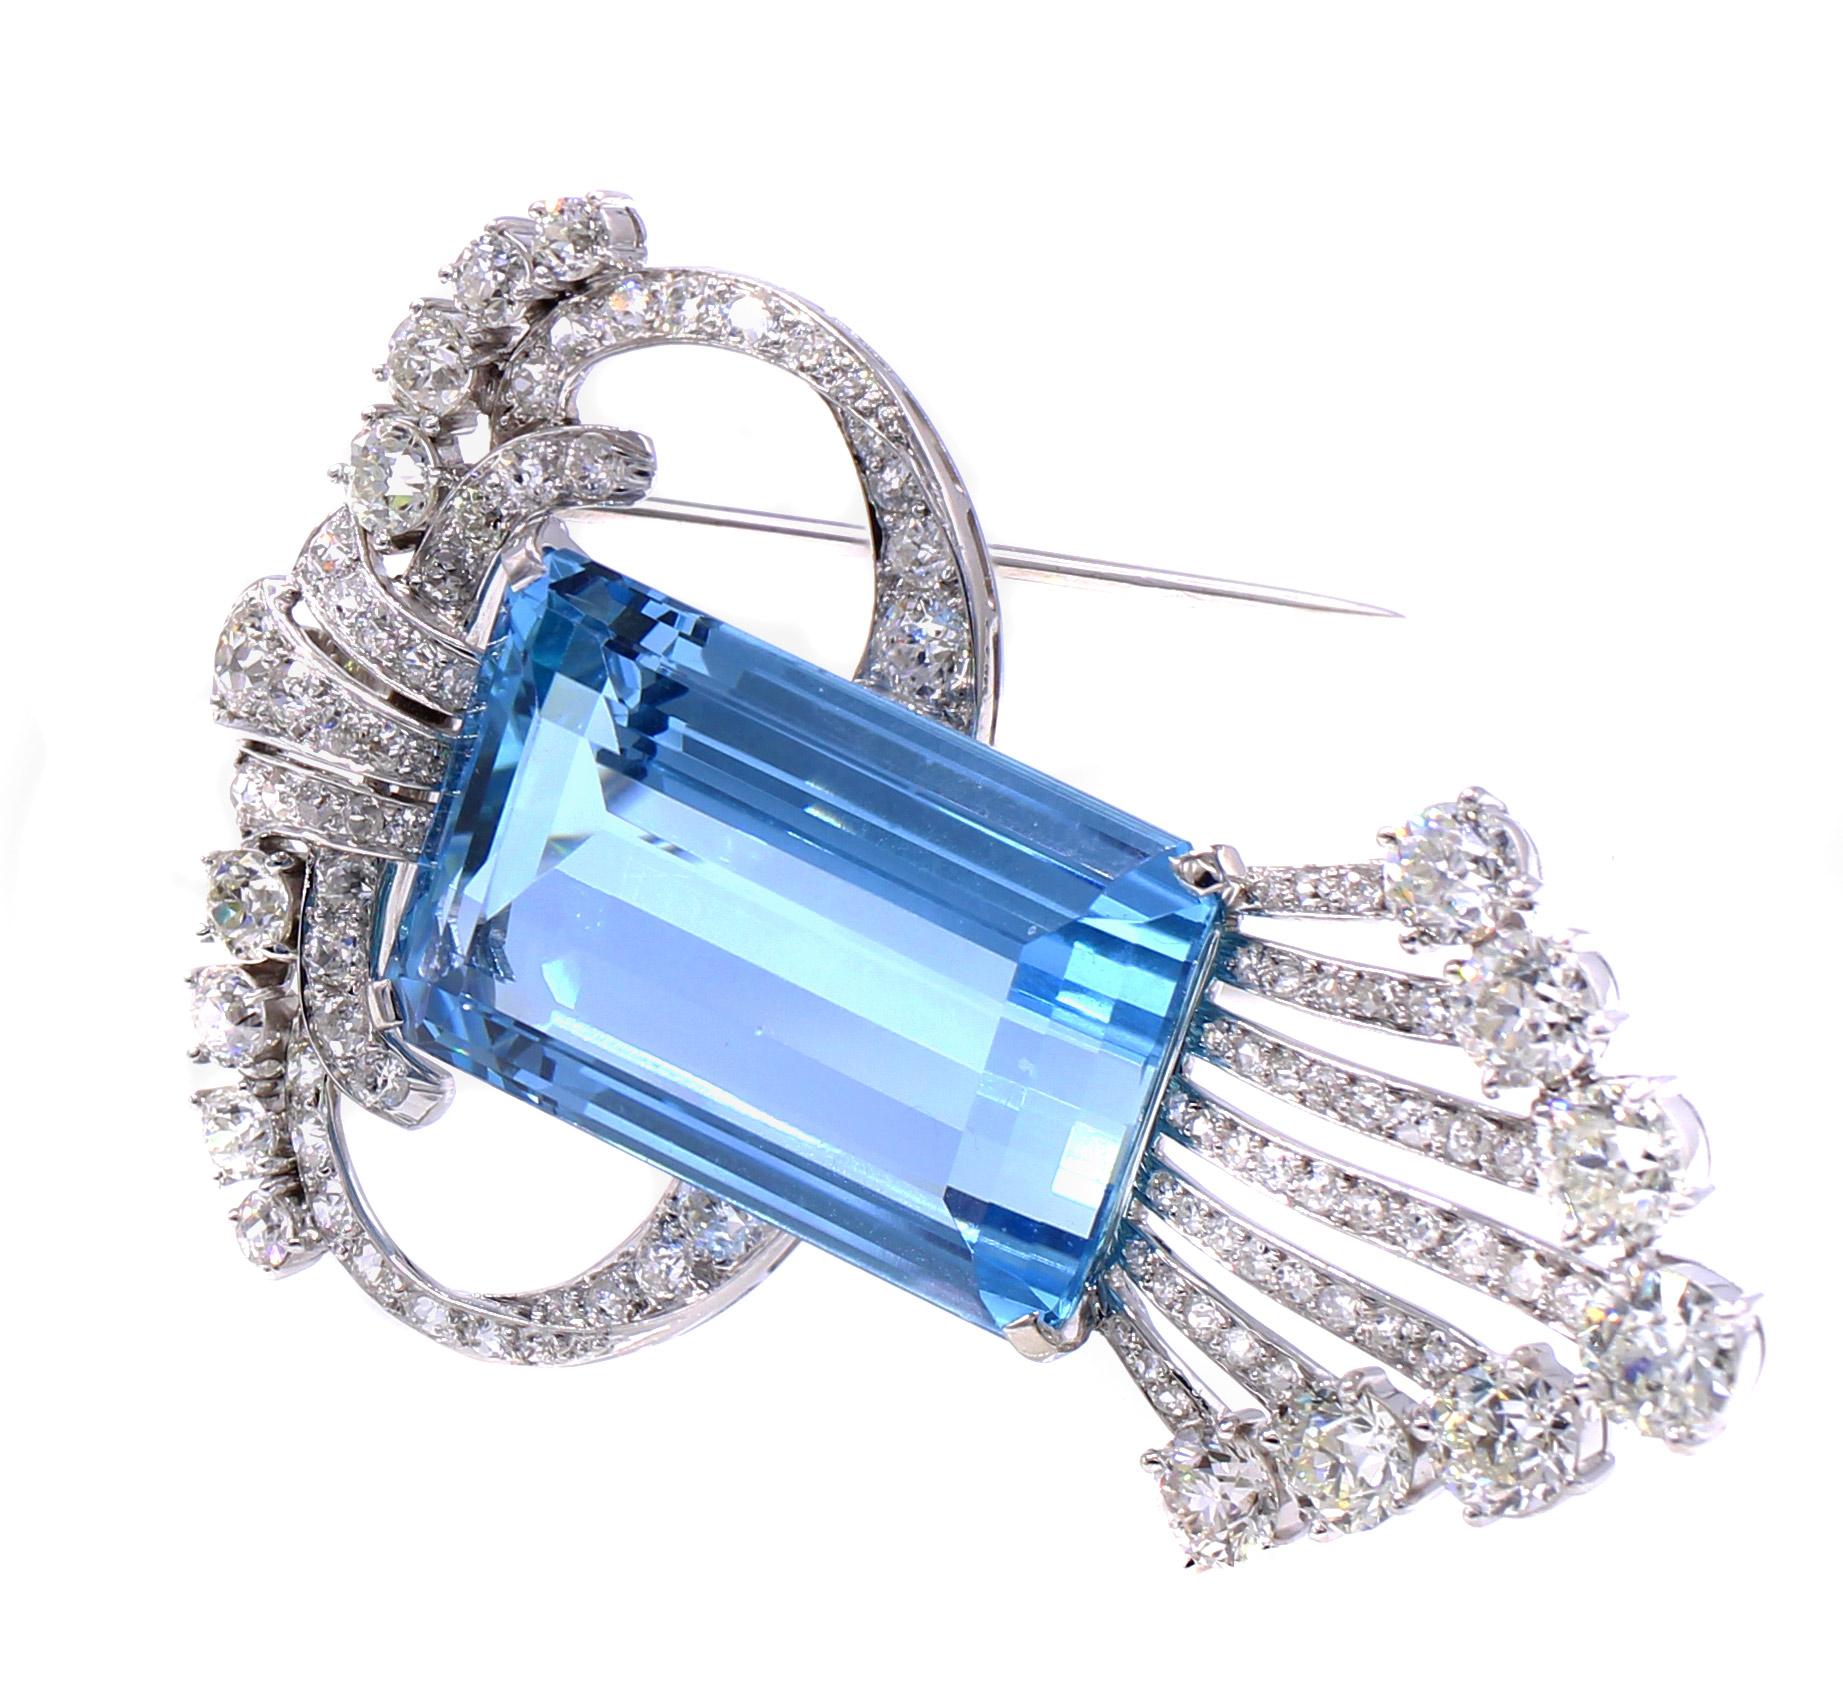 A gorgeous Santa Maria blue rectangular step cut aquamarine weighing 46.30 carats in the center piece of this magnificent Art Deco clip-brooch/pendant necklace. Embellished by Old European Cut diamonds weighing approximately 7 carats this wonderful